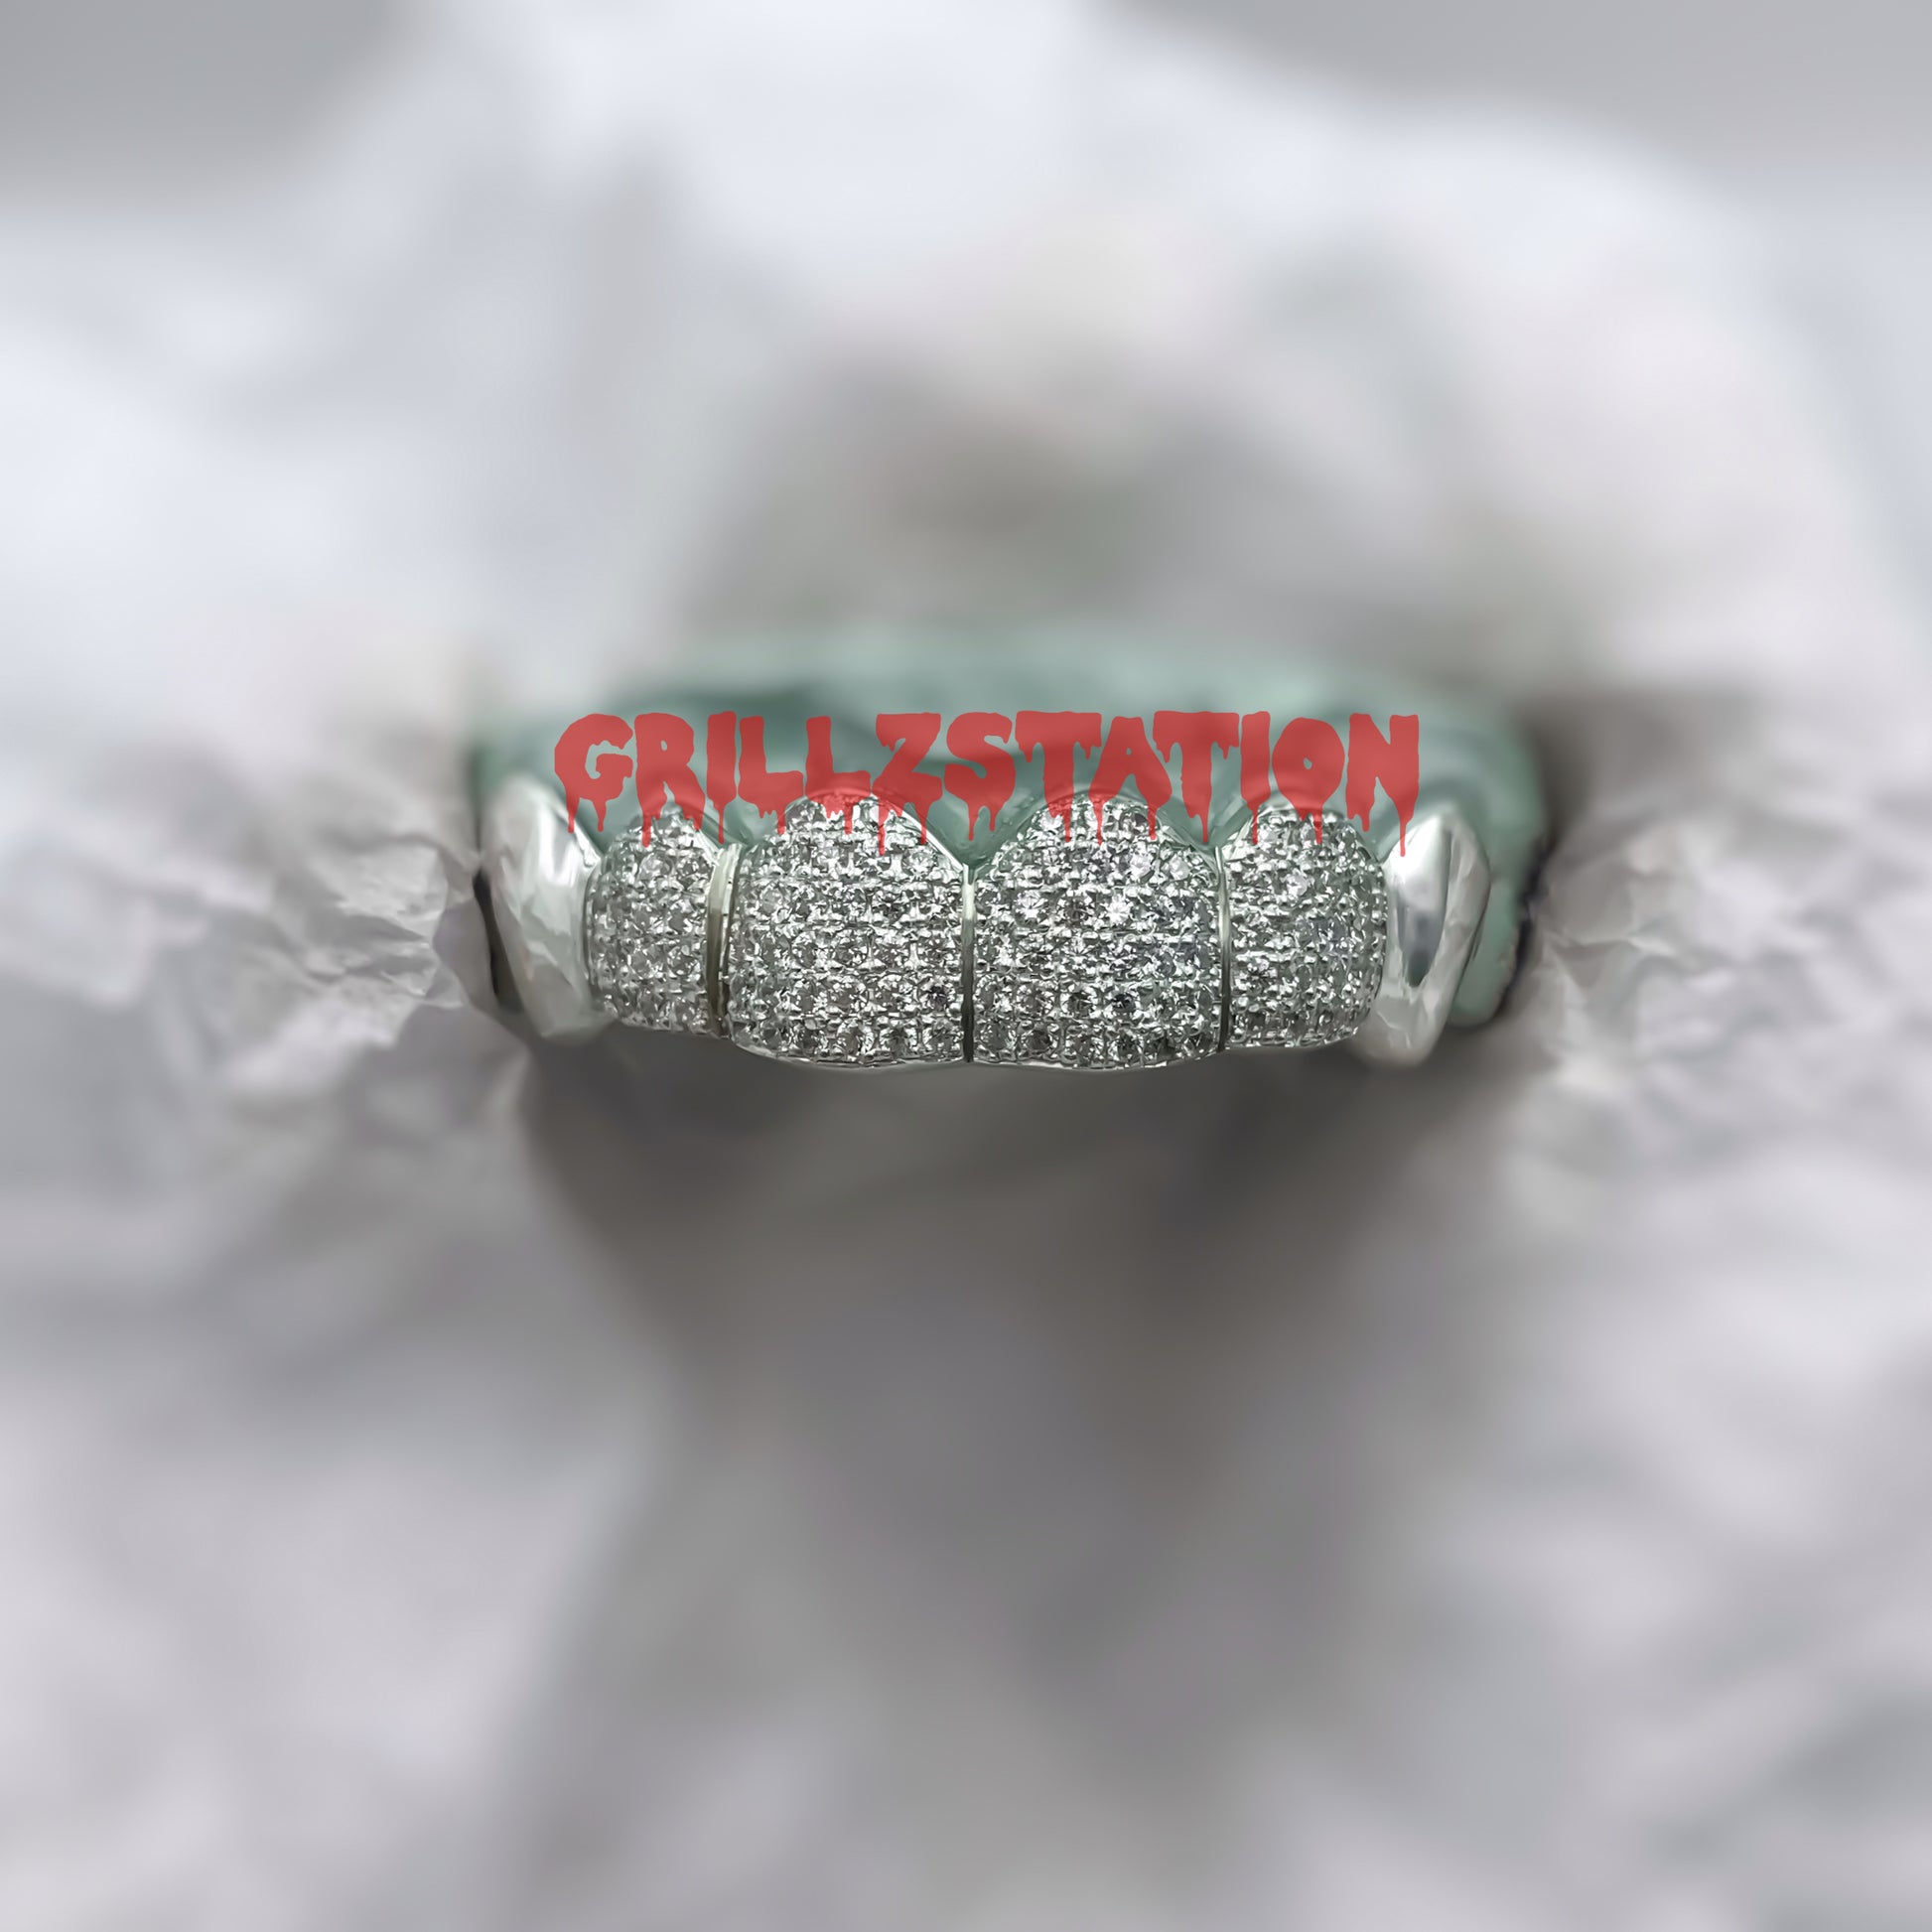 DIAMOND GRILLZ / Honeycomb REAL diamond Or Cz handset with 2 end solid - GRILLZSTATION 